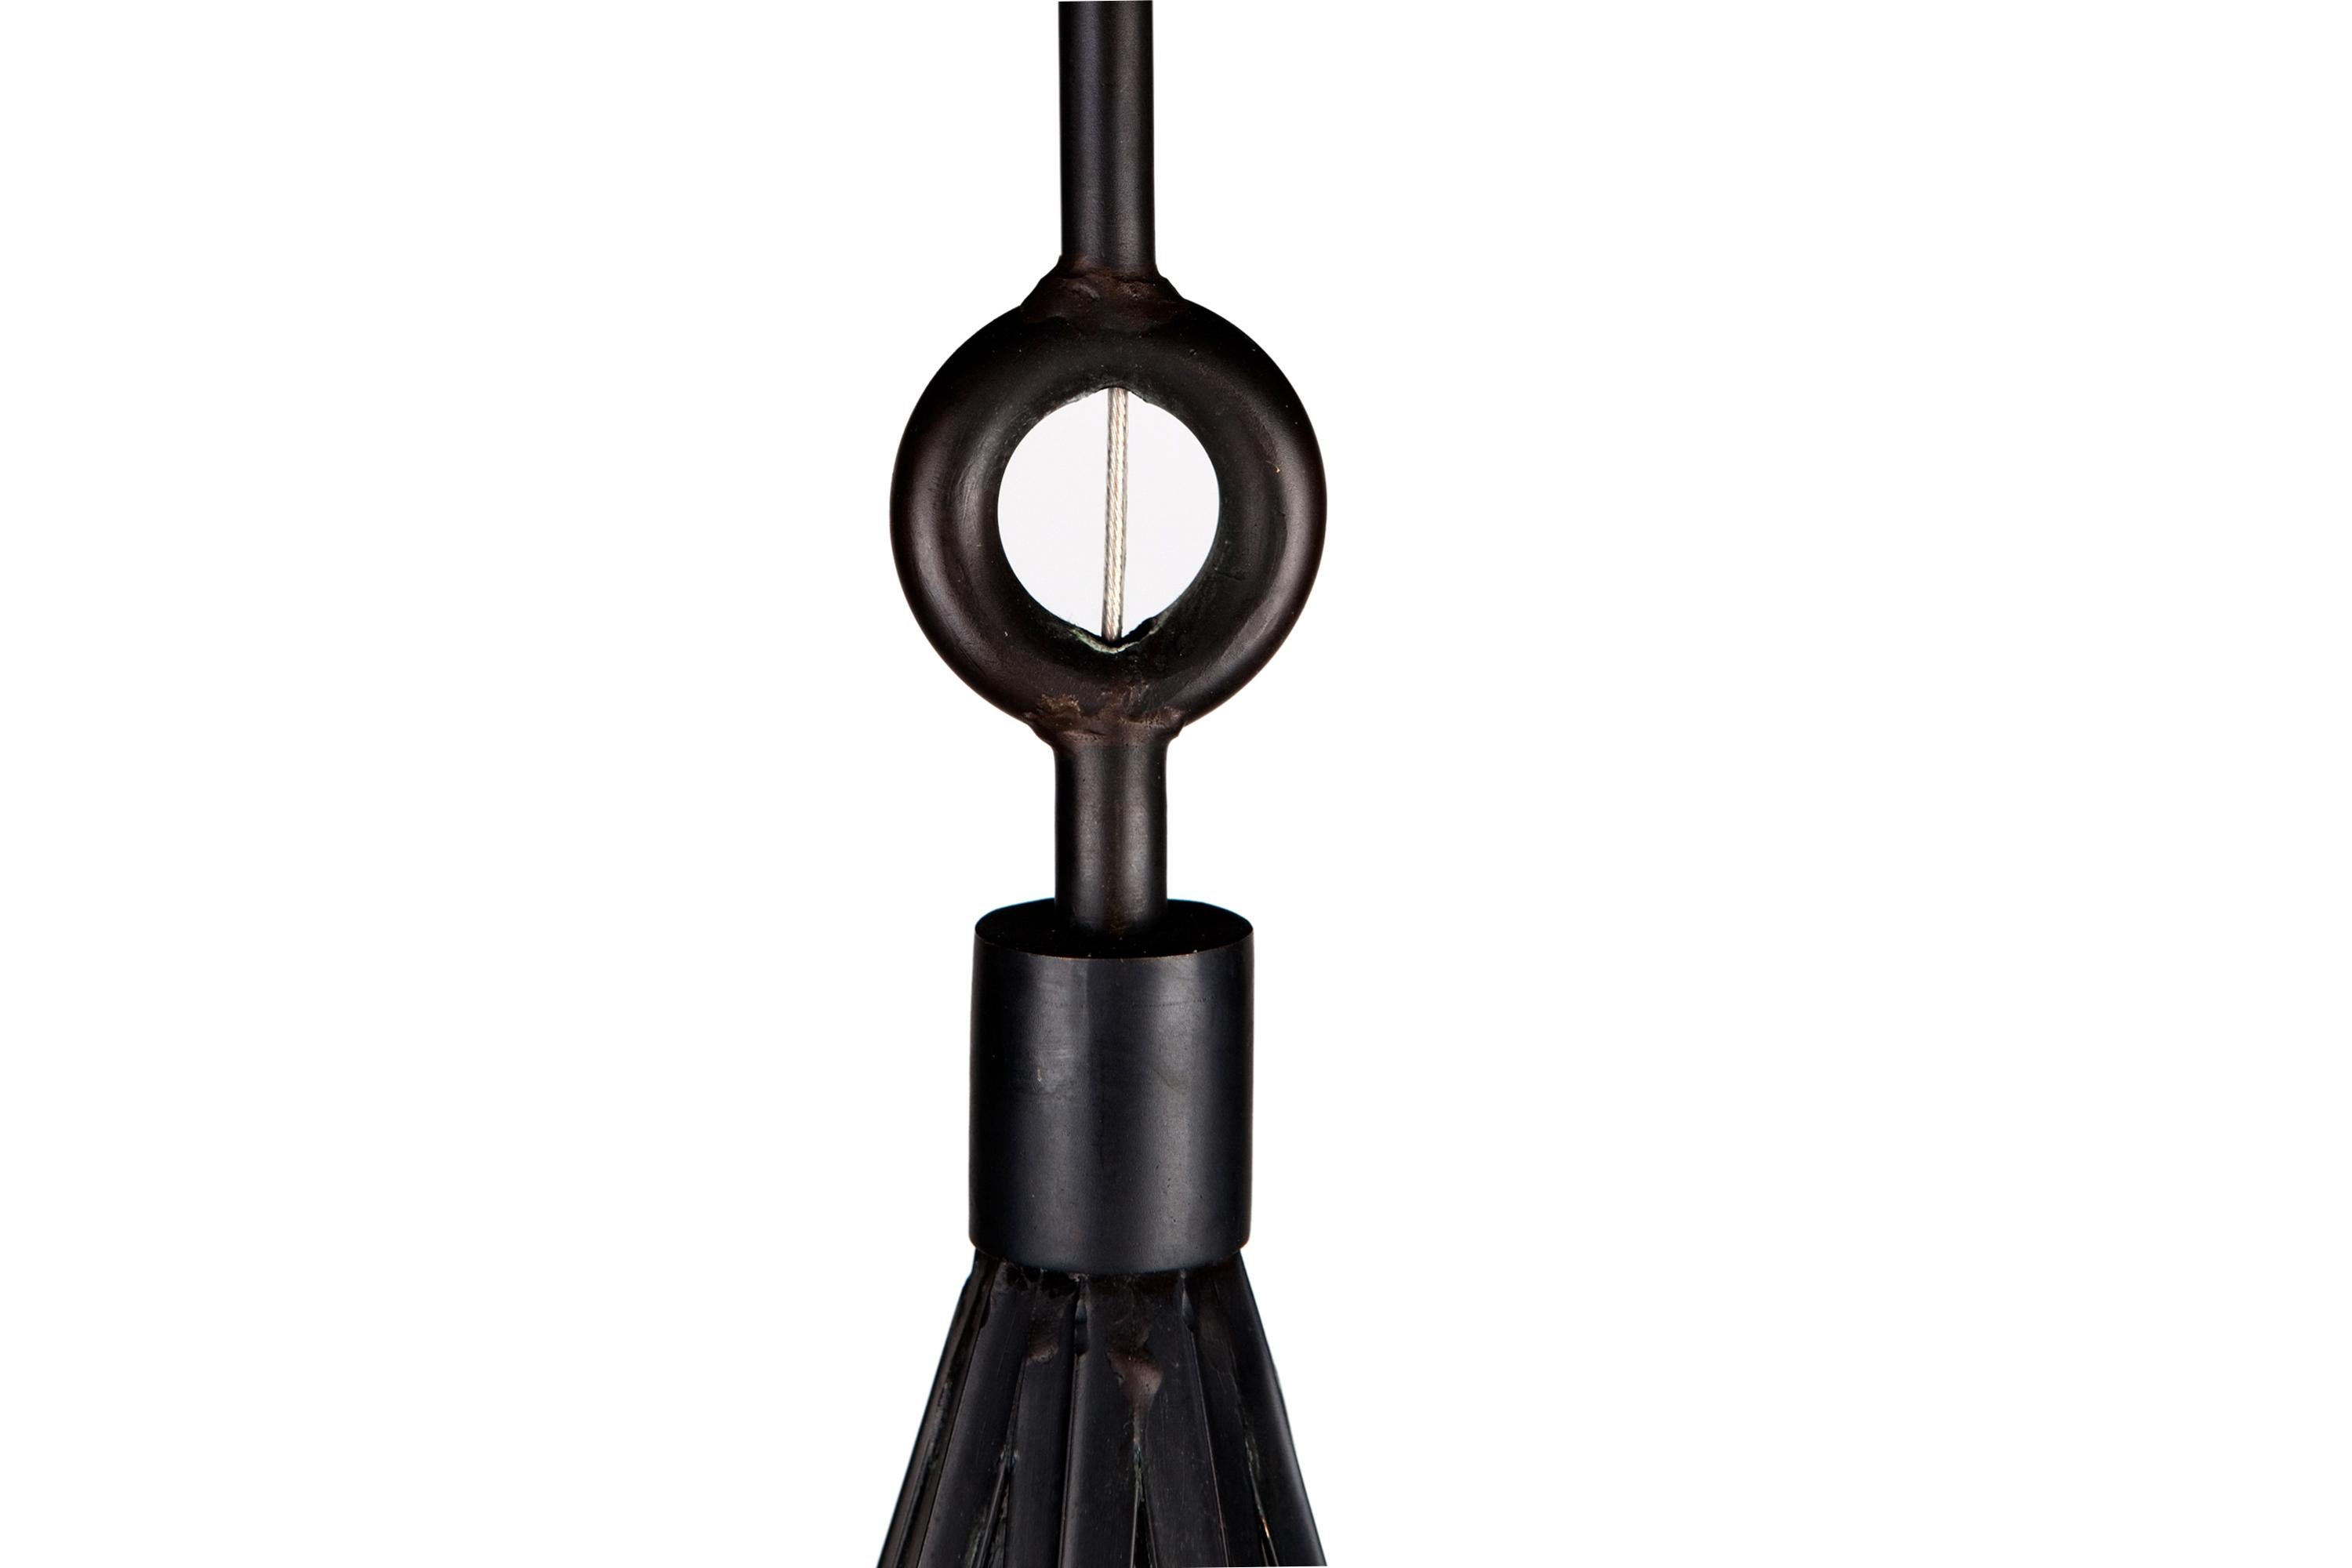 Blackened Octapyramid Lantern Pendant Created by Atelier Boucquet For Sale